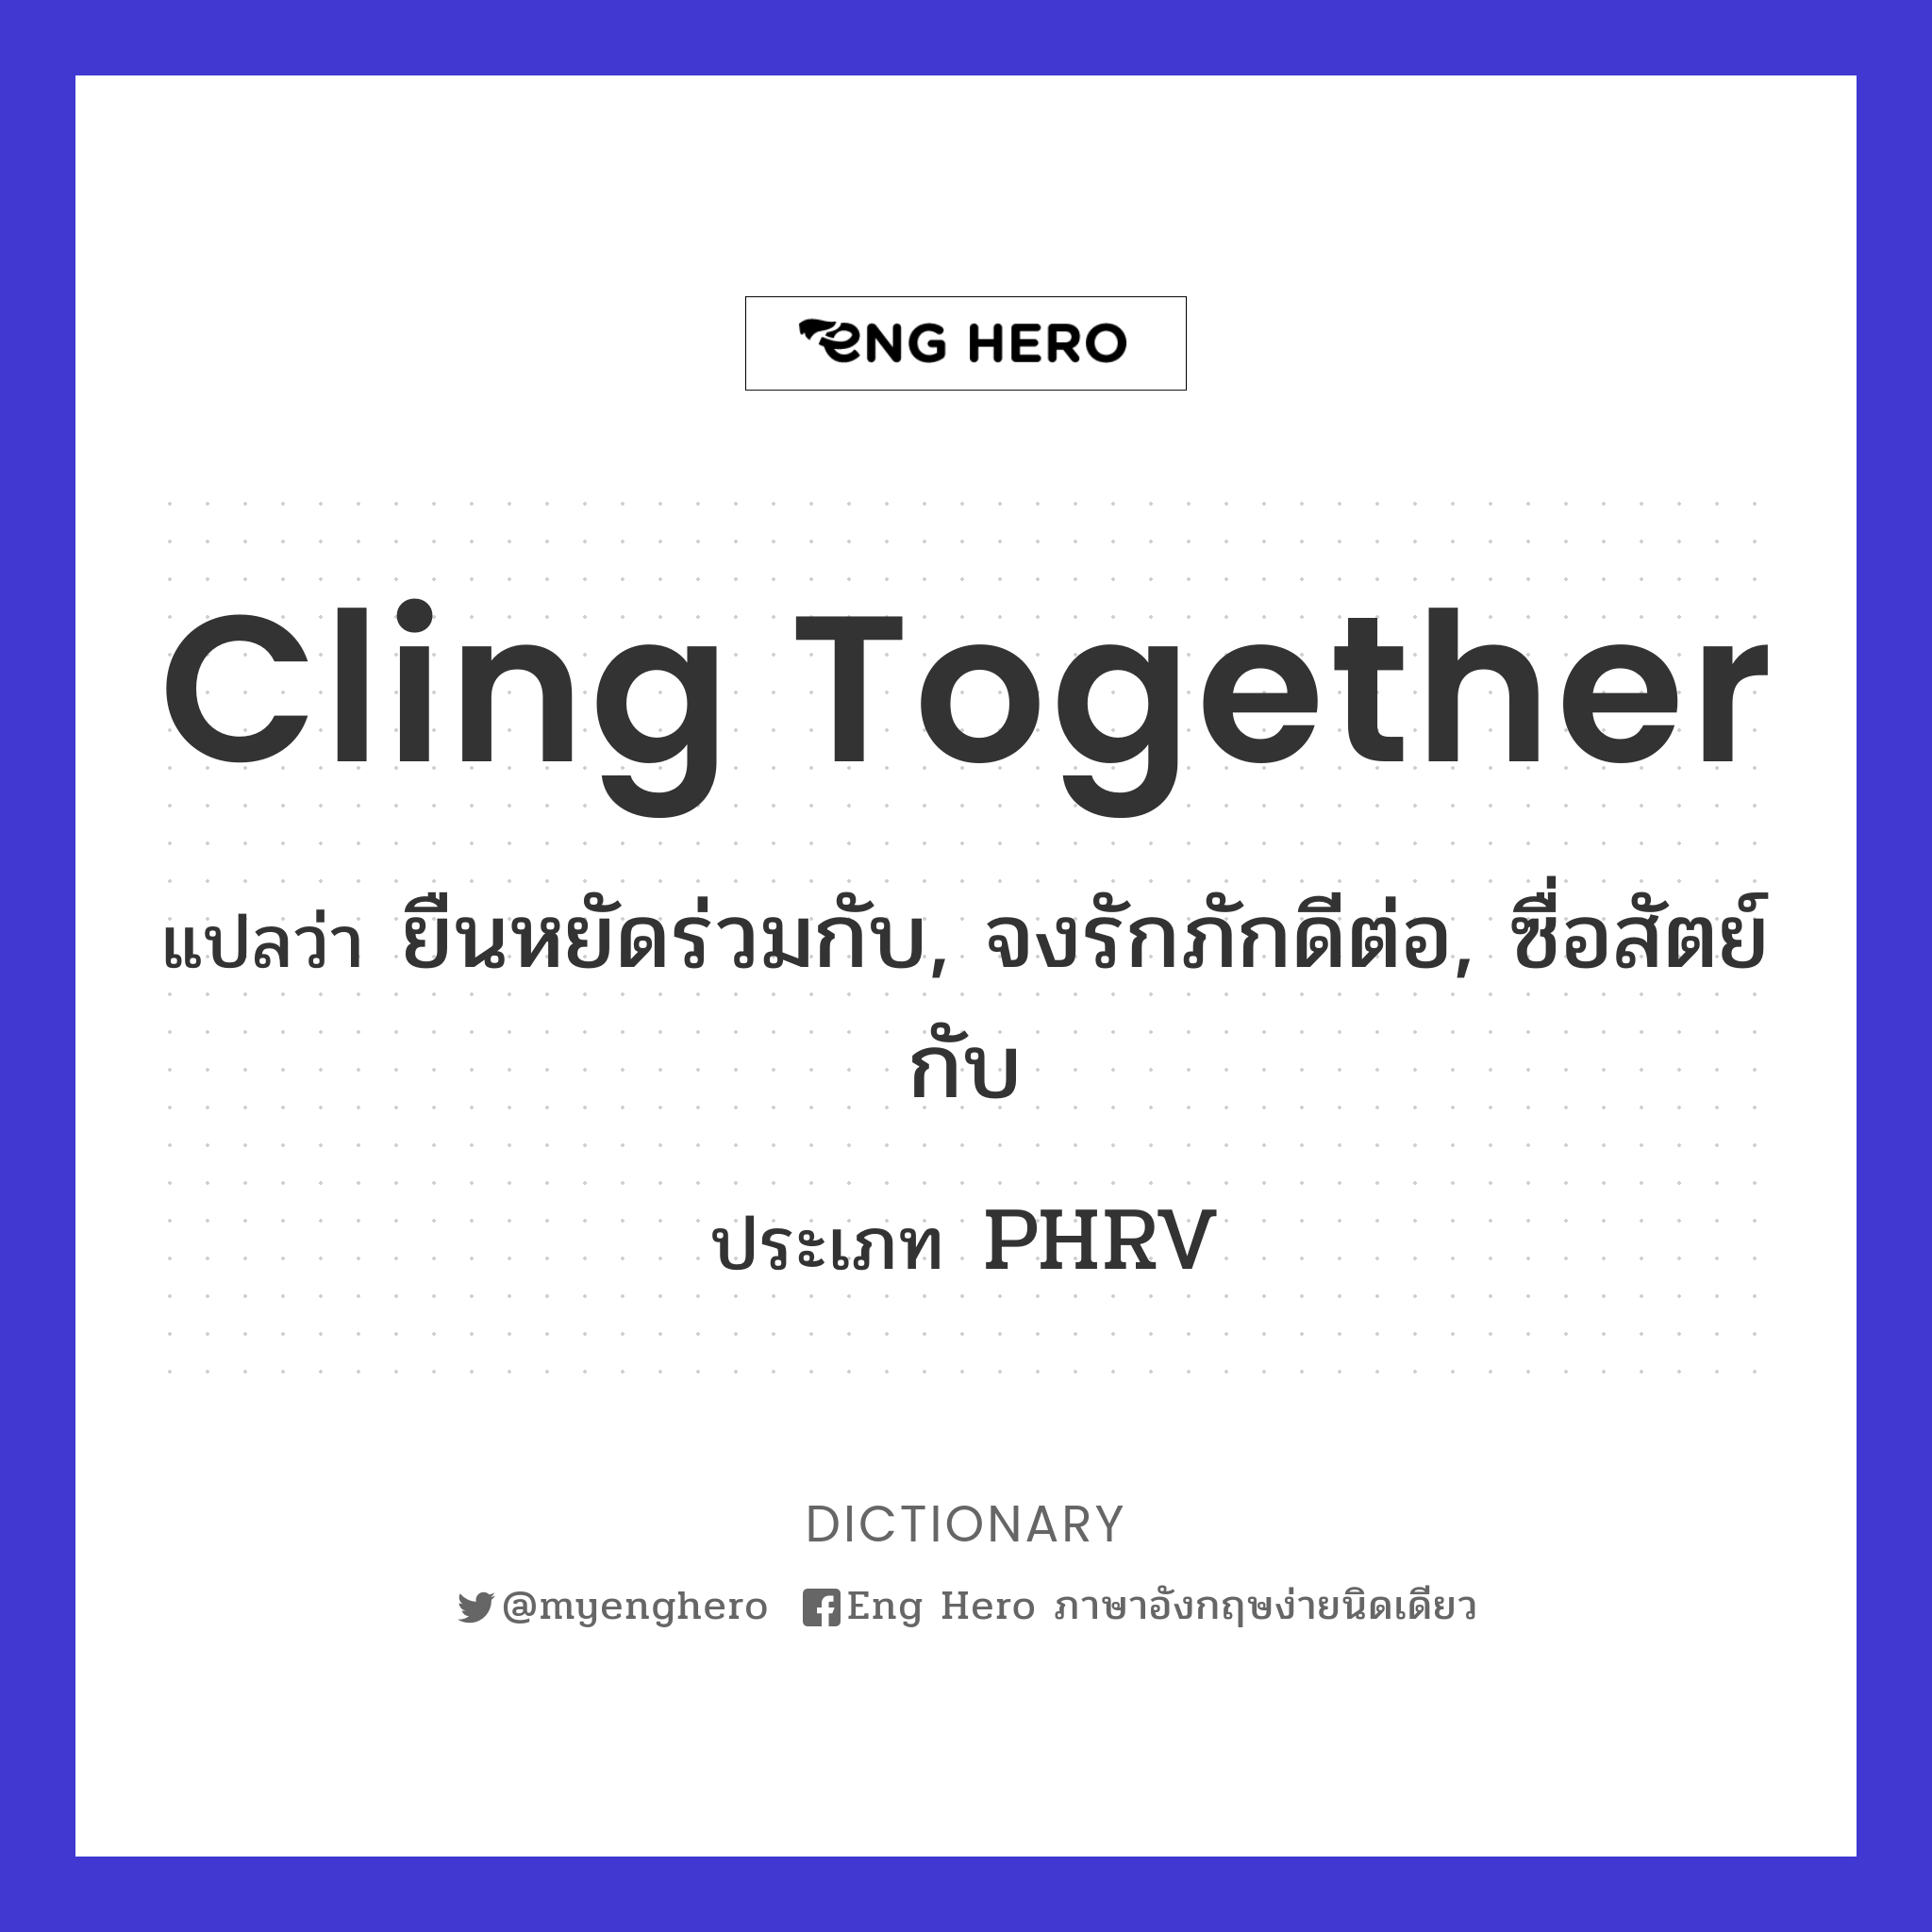 cling together